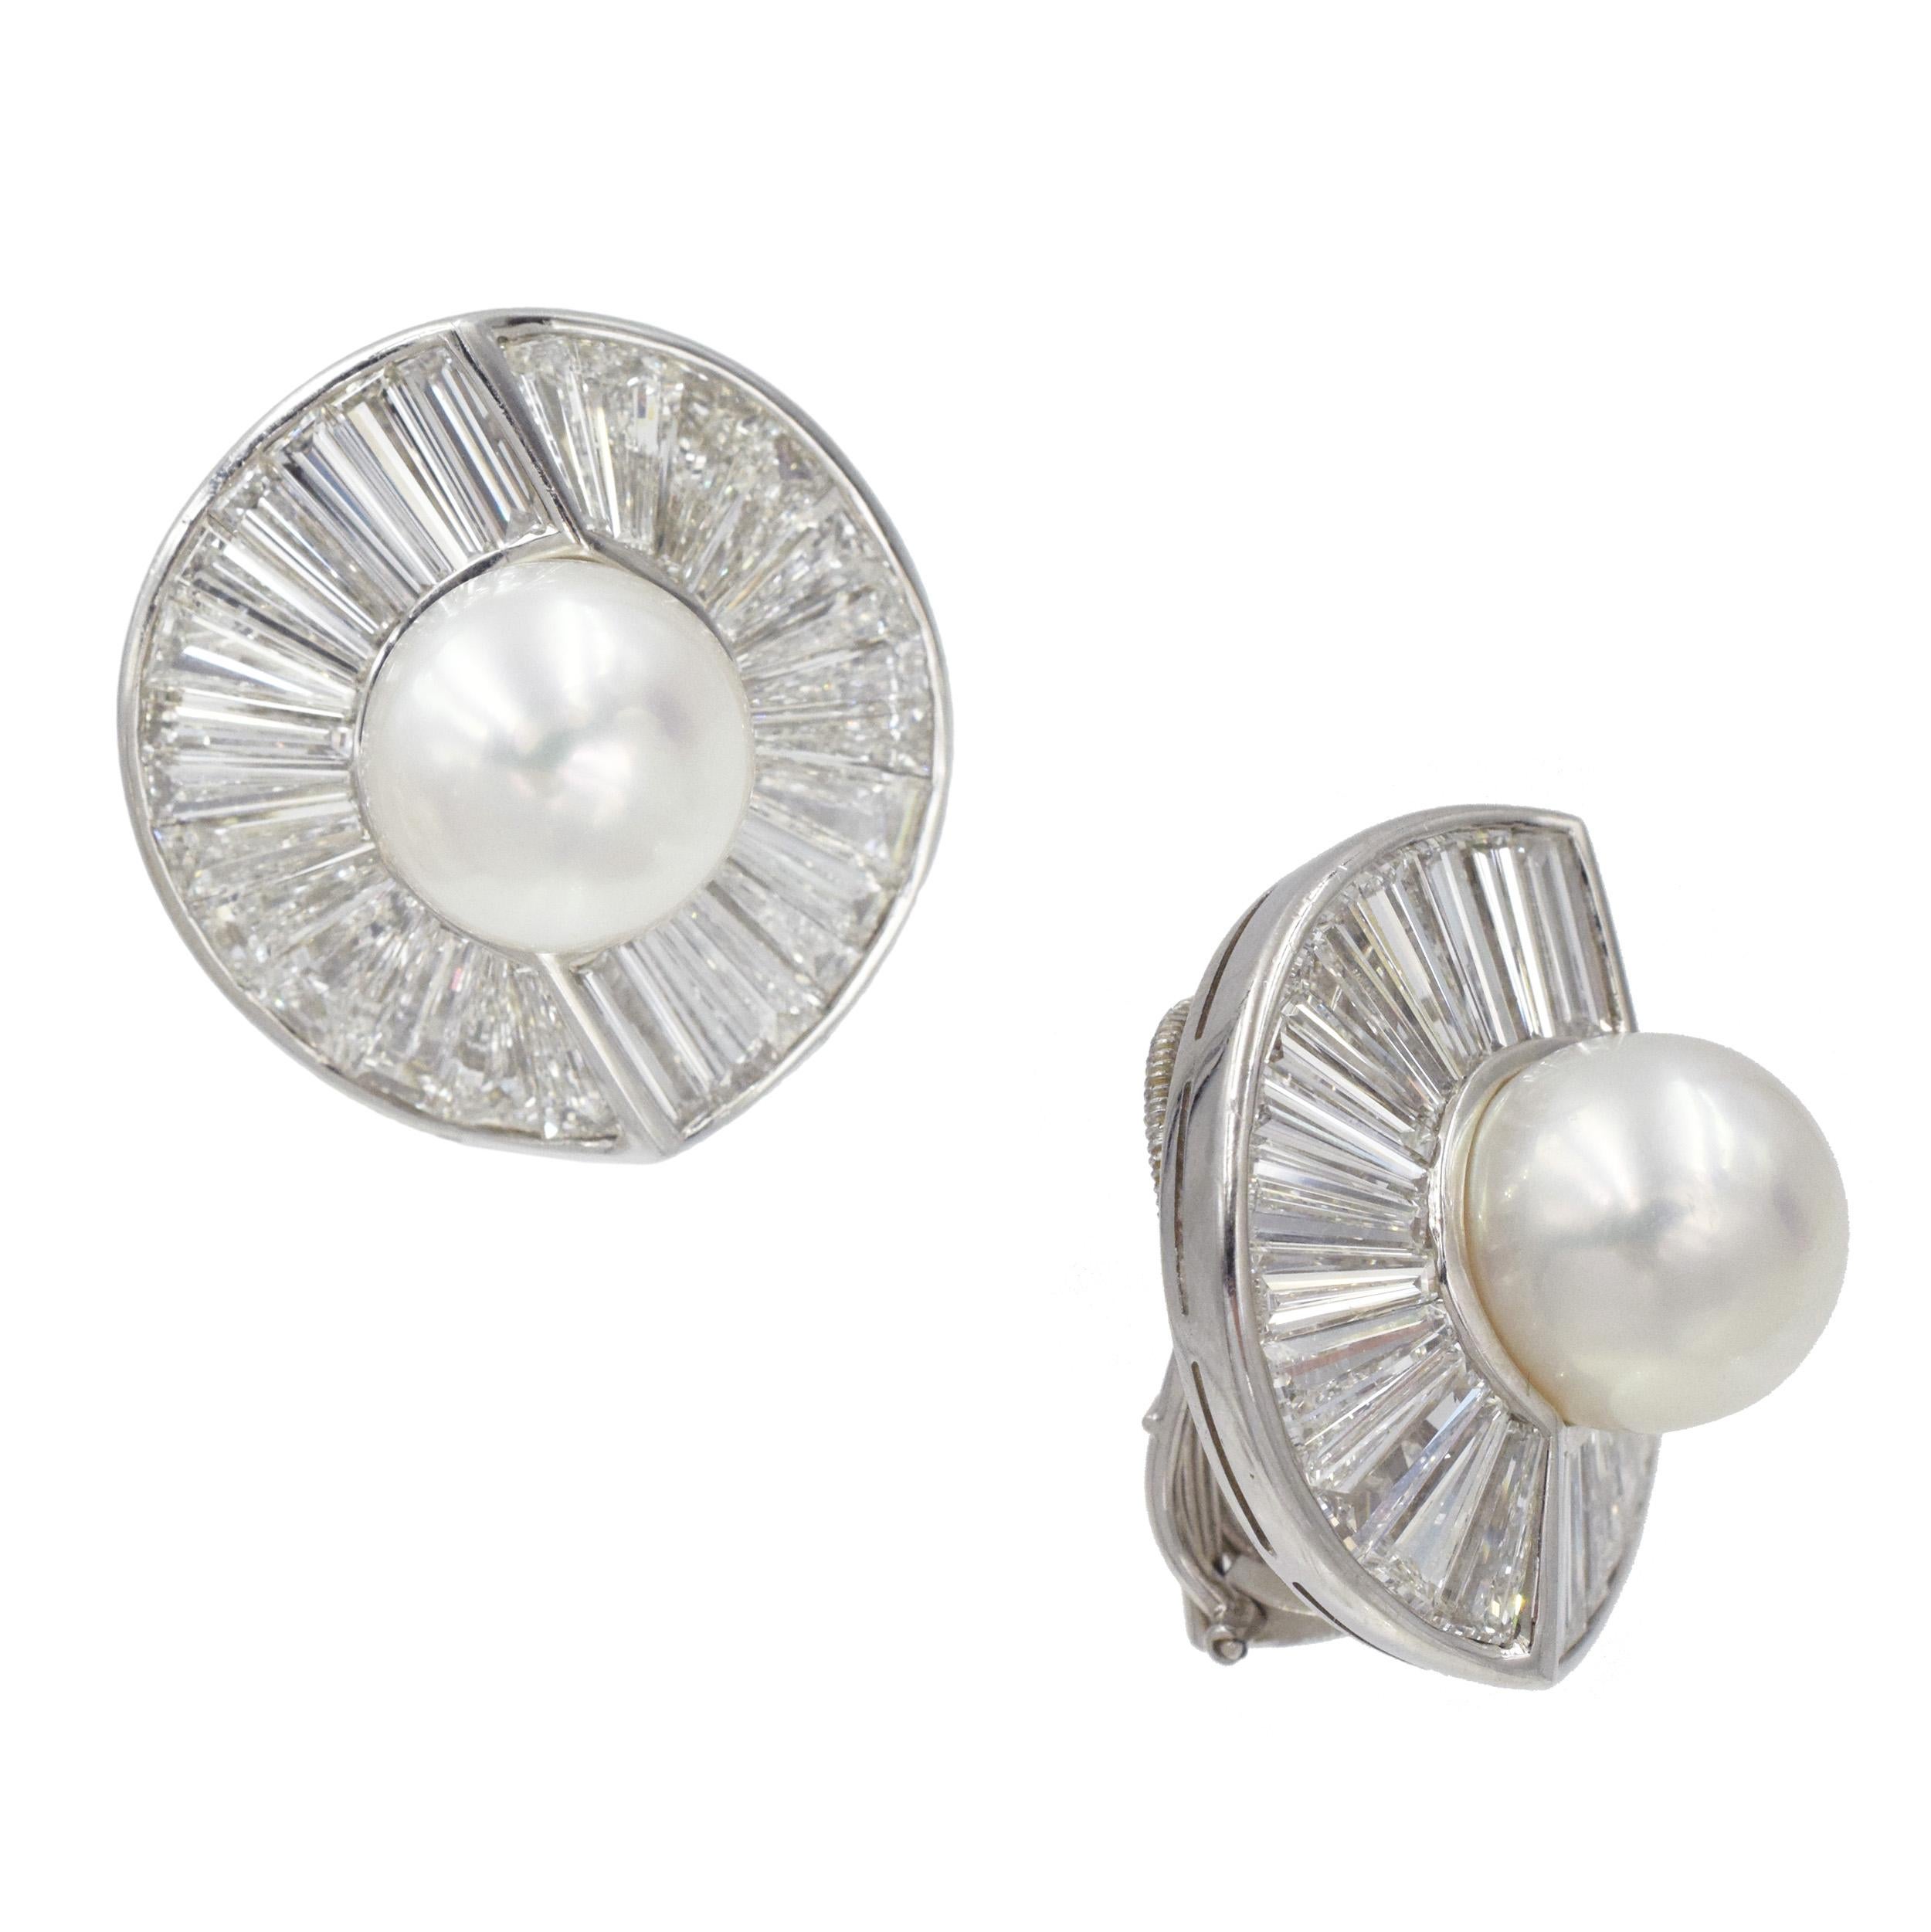 NO RESERVE | HARRY WINSTON CULTURED PEARL AND DIAMOND EARRINGS, | Christie's